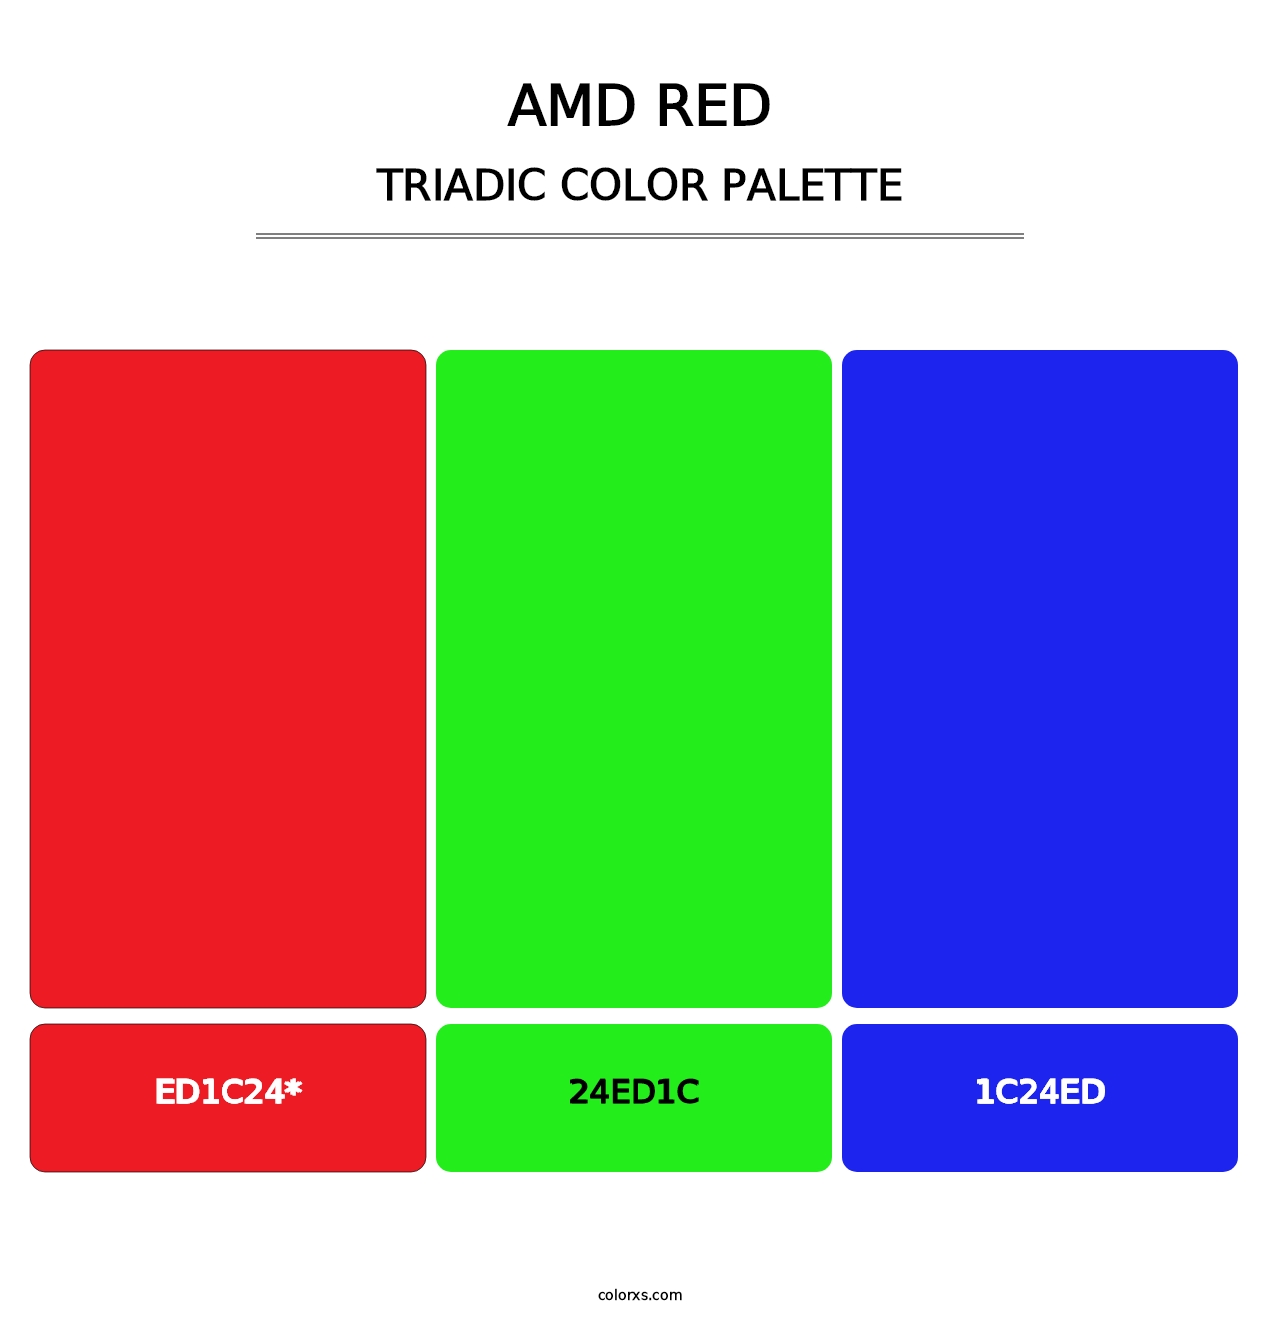 AMD Red - Triadic Color Palette